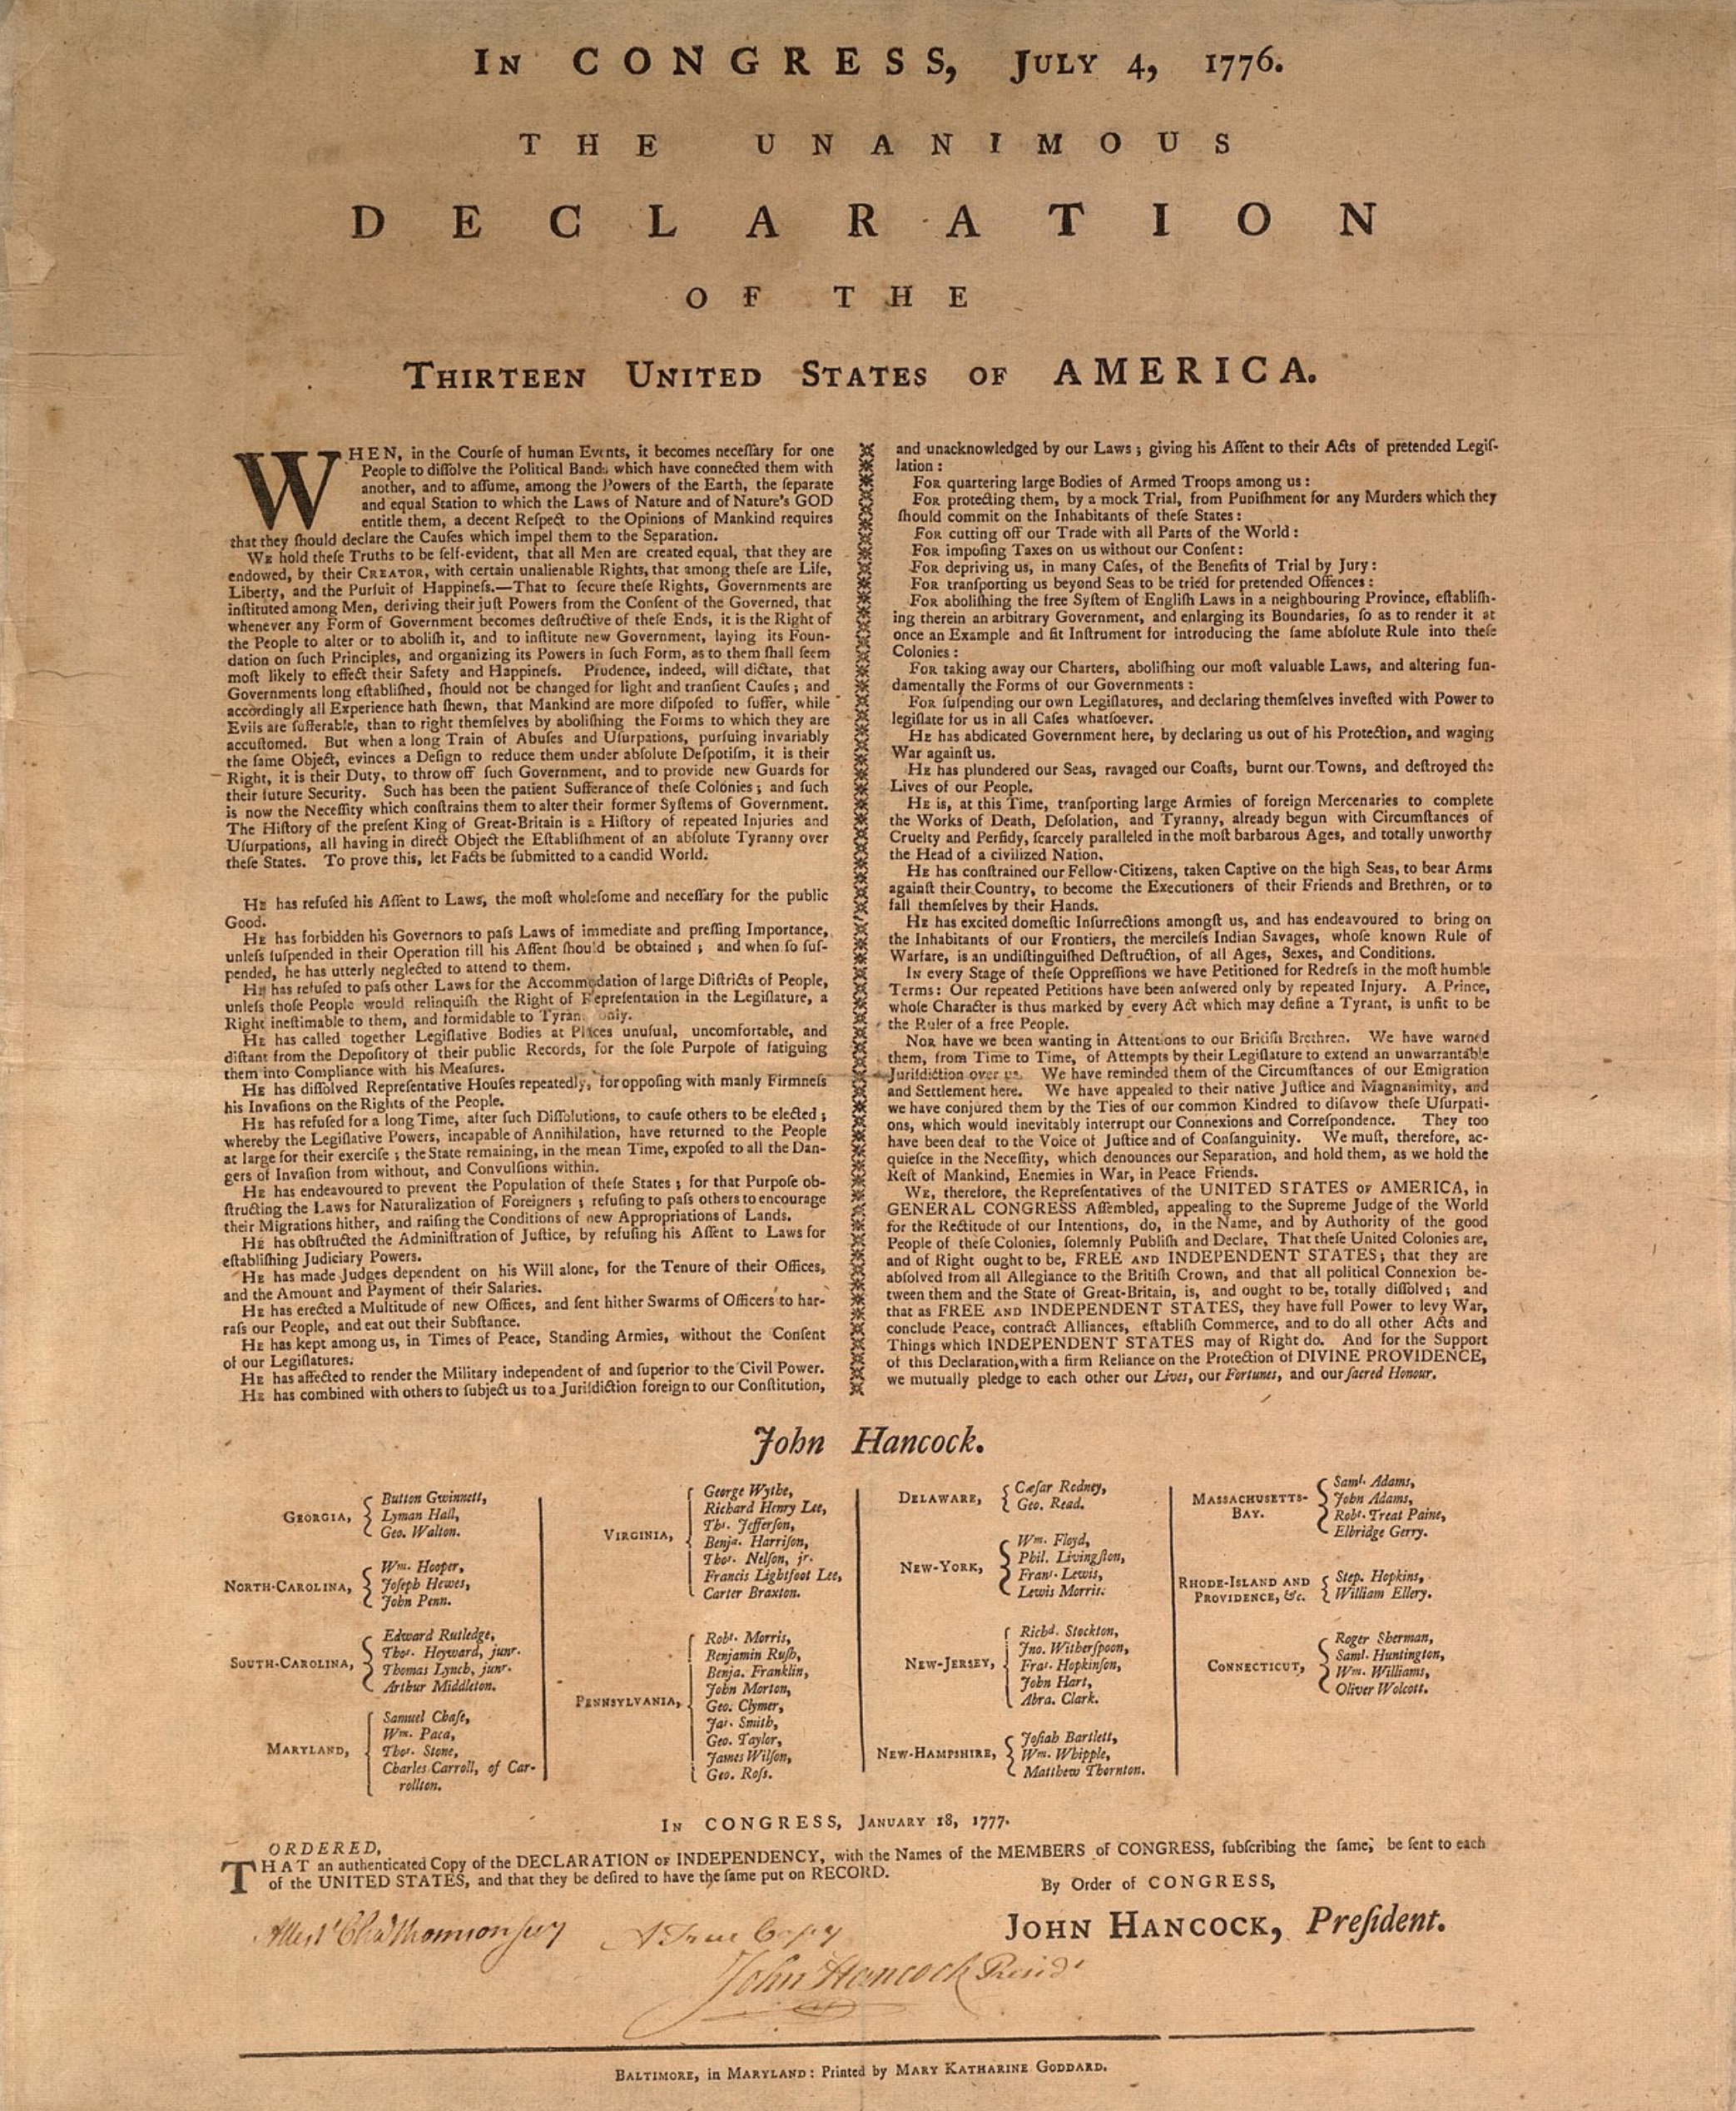 This is a printed broadside of the Declaration of Independence, published in 1777 by Mary Katherine Goddard of Baltimore. It is the first printed text to include the names of the signers.